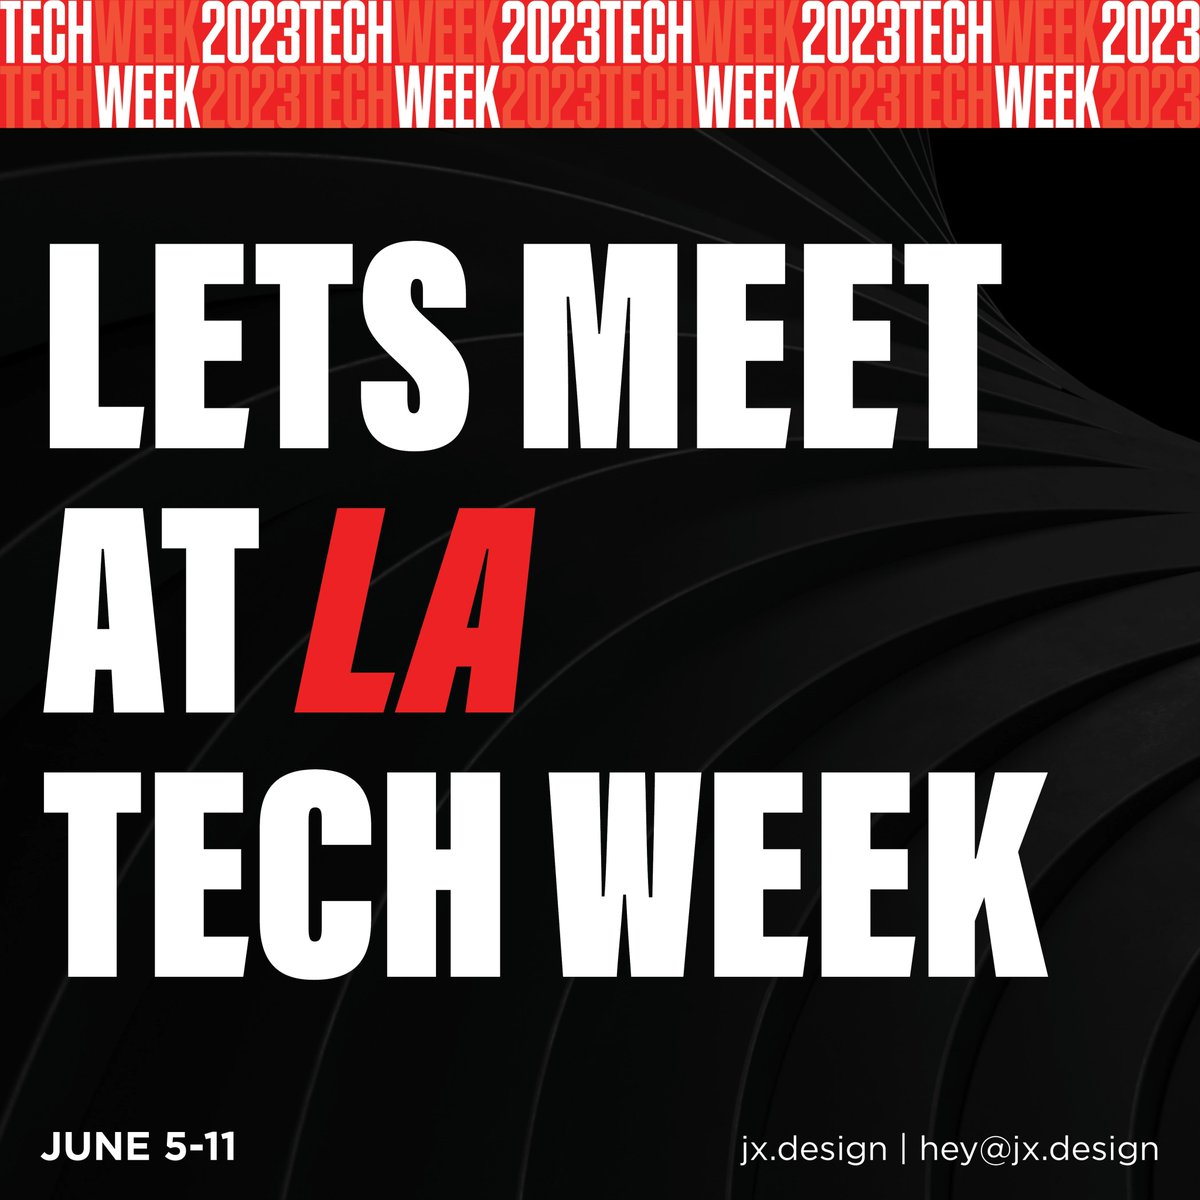 We will be attending a ton of LA Tech Week events, shoot us a message and let's connect! Which event are you most excited to attend?

#jxdesign #uxui #designagency #productstrategy #productdesign #prototyping #digital #startups #techweek #losangeles #latechweek #techweek2023